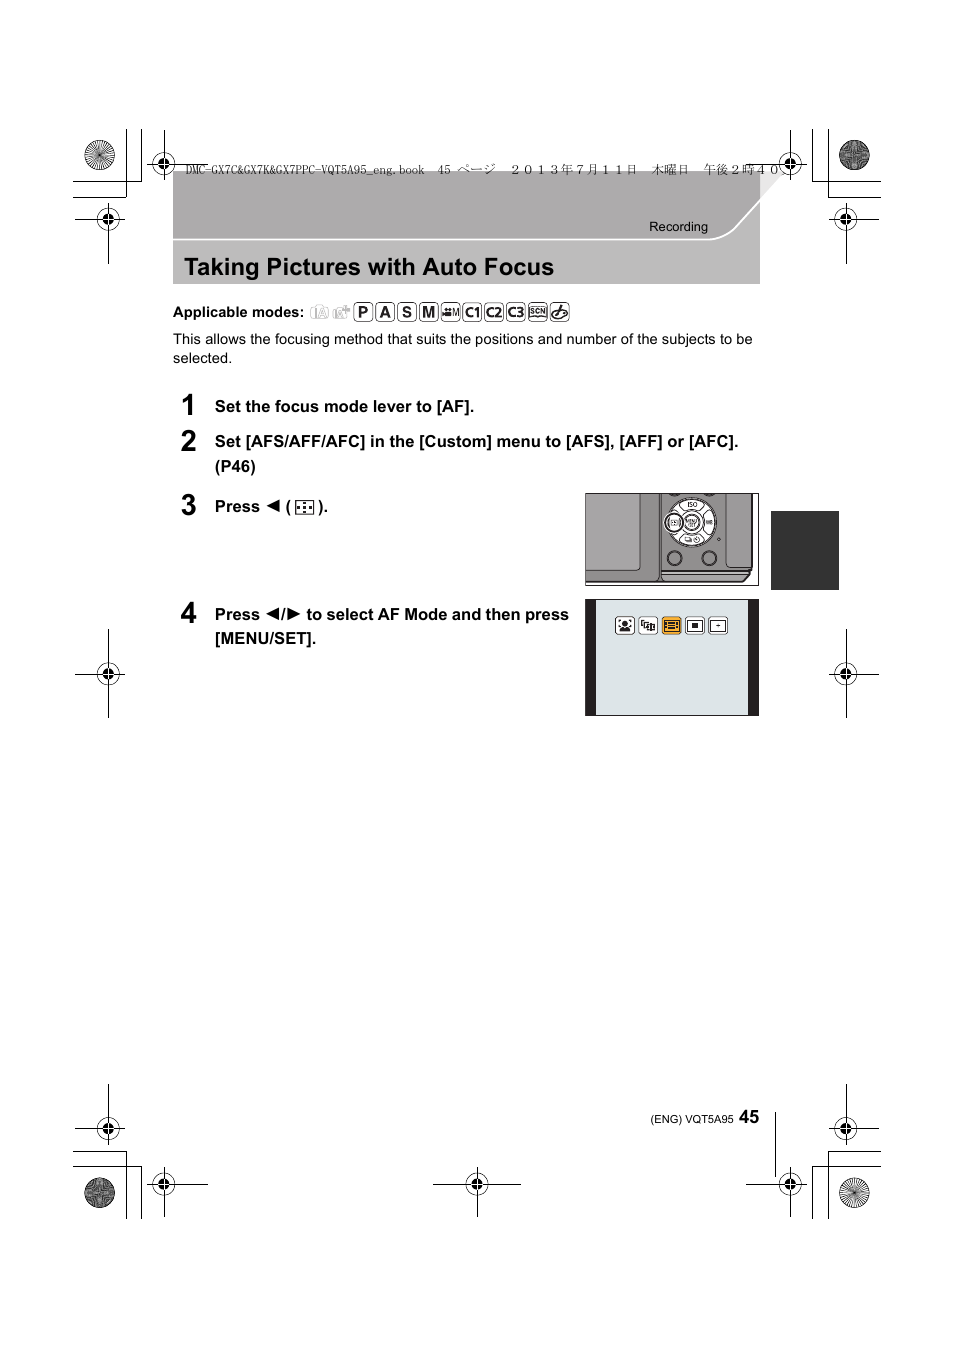 Taking pictures with auto focus | Panasonic DMC-GX7SBODY User Manual | Page 45 / 104